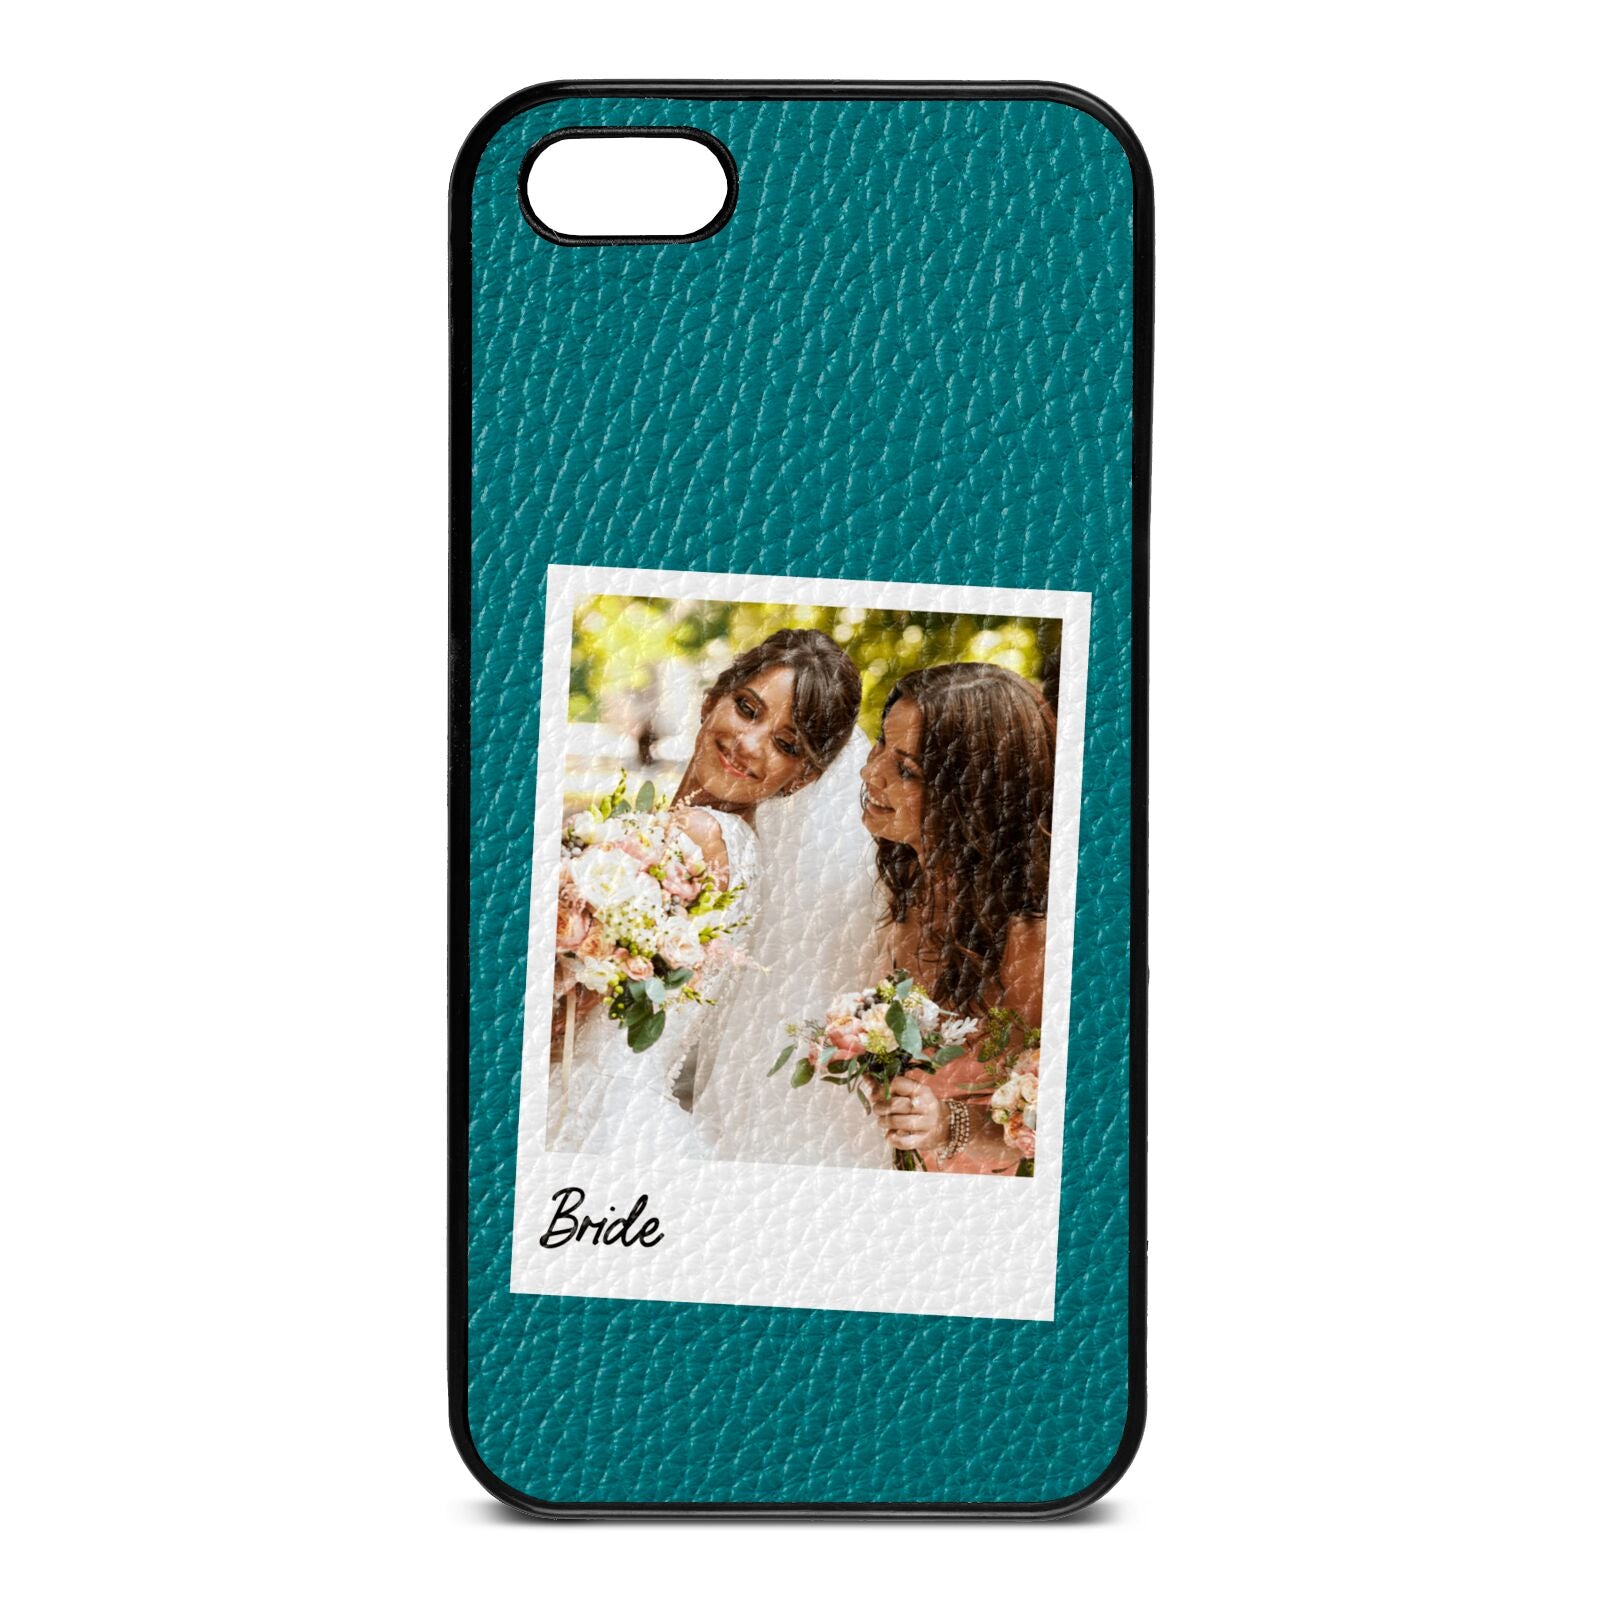 Bridal Photo Green Pebble Leather iPhone 5 Case